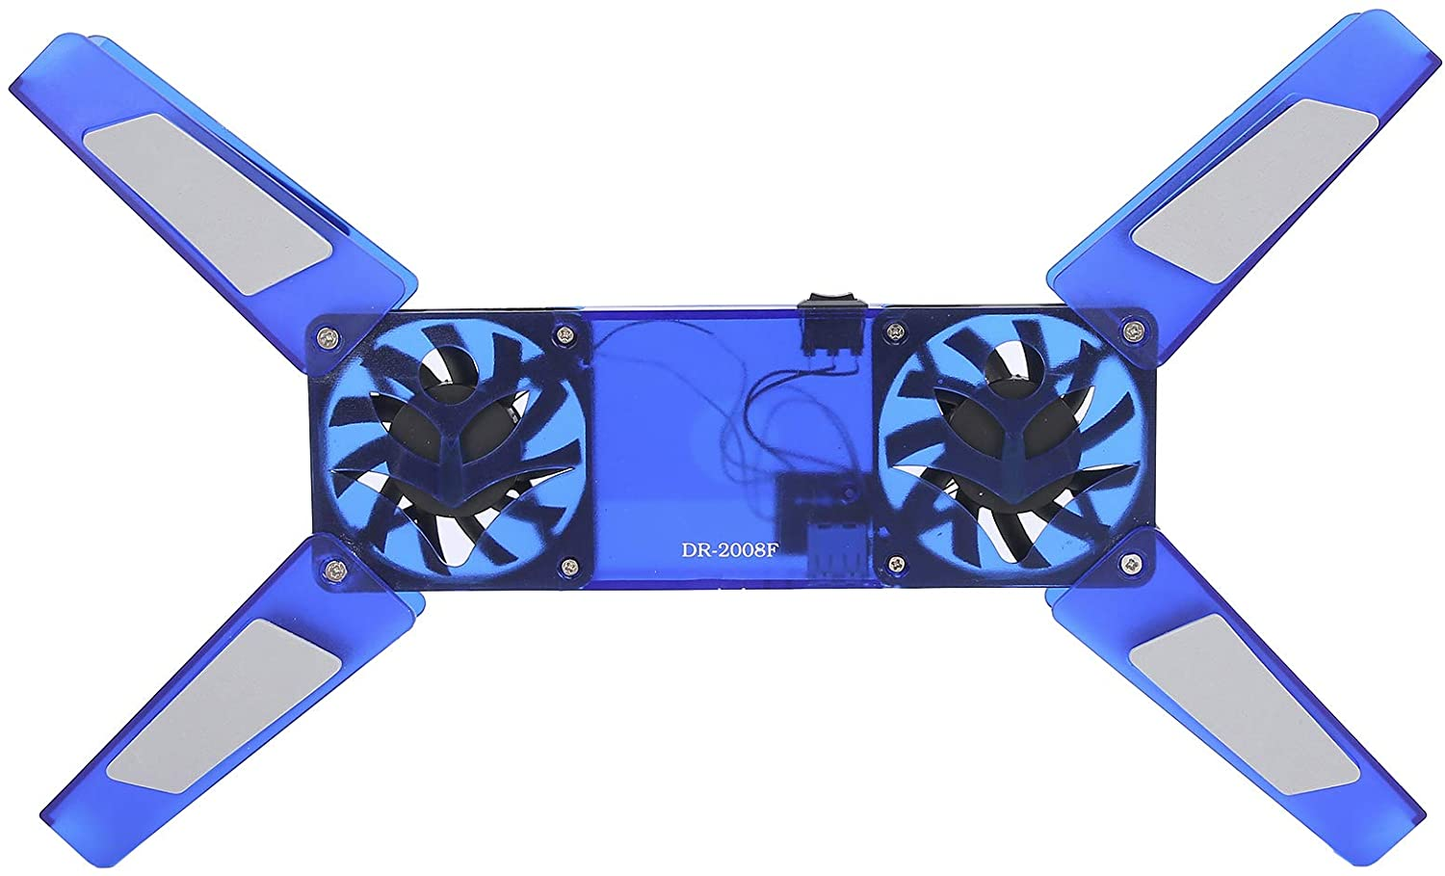 Laptop Cooling Stand, Laptop Cooler with 2 Fans, Foldable Laptop Cooling Fan Pad USB Cable Computer Supplies(Blue)